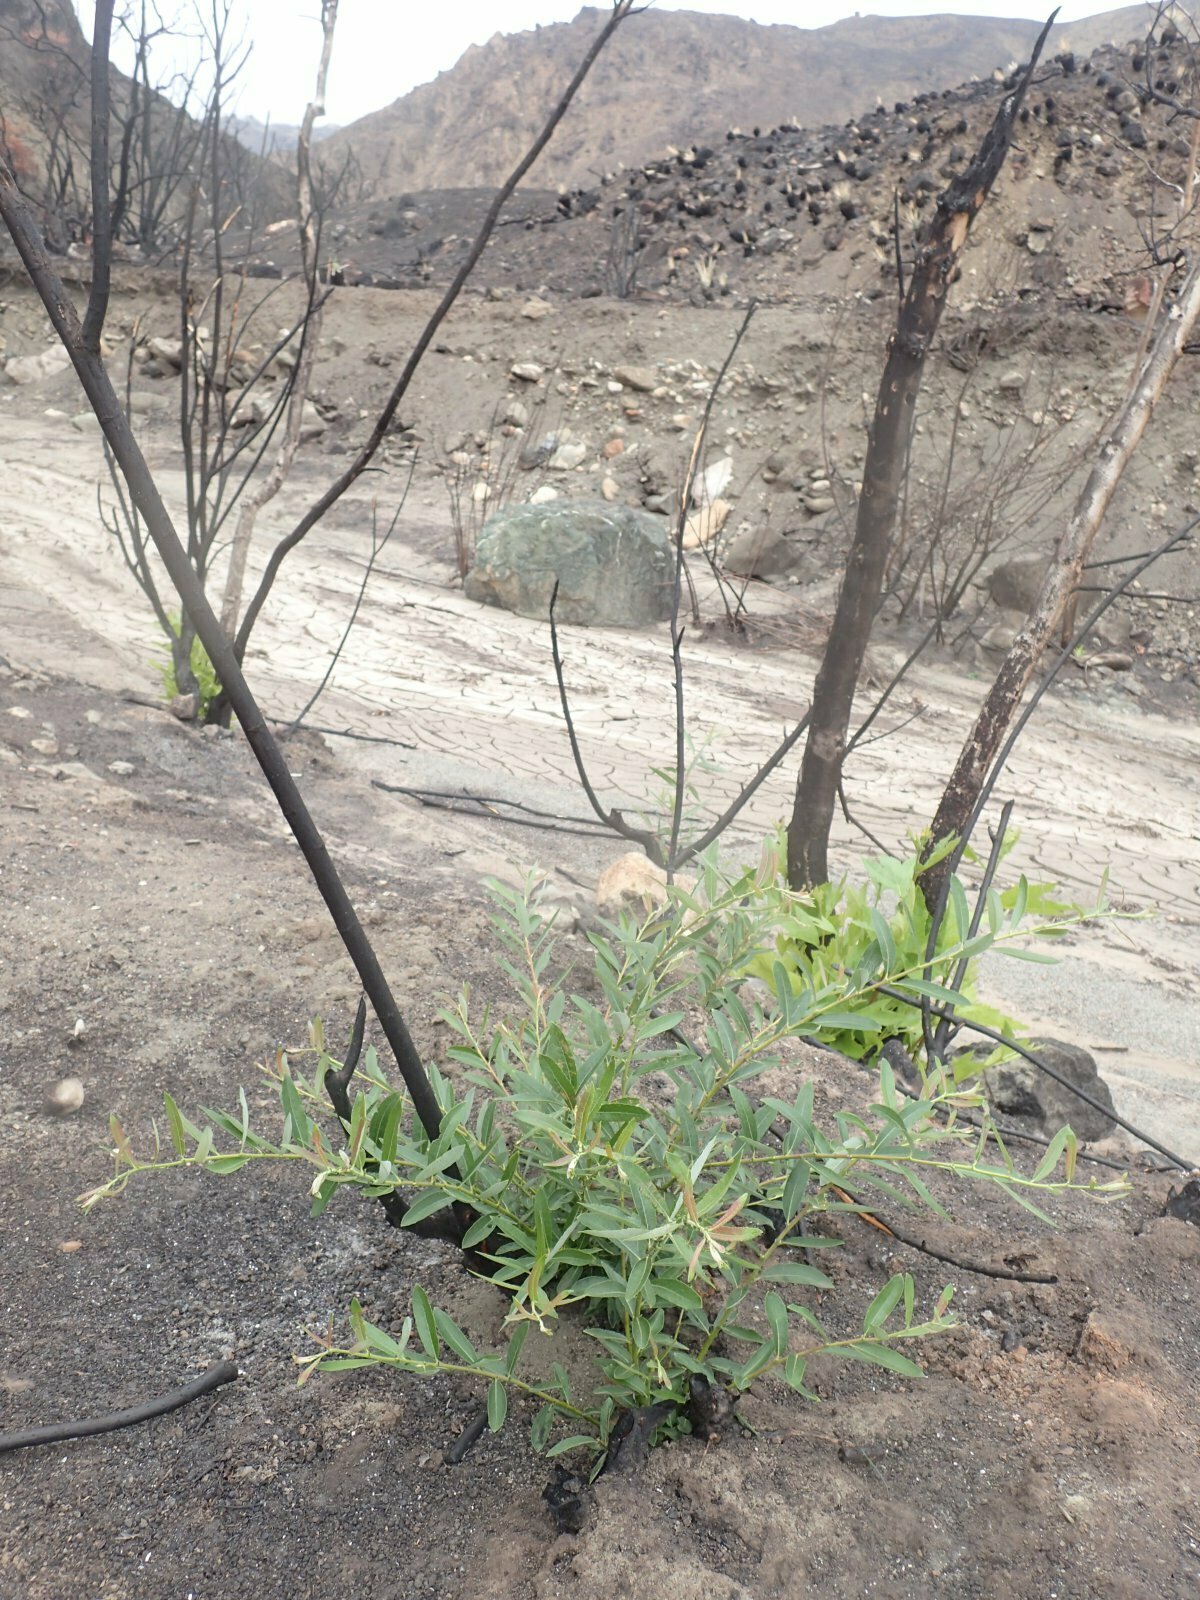 High Resolution Baccharis salicifolia Fire recovery